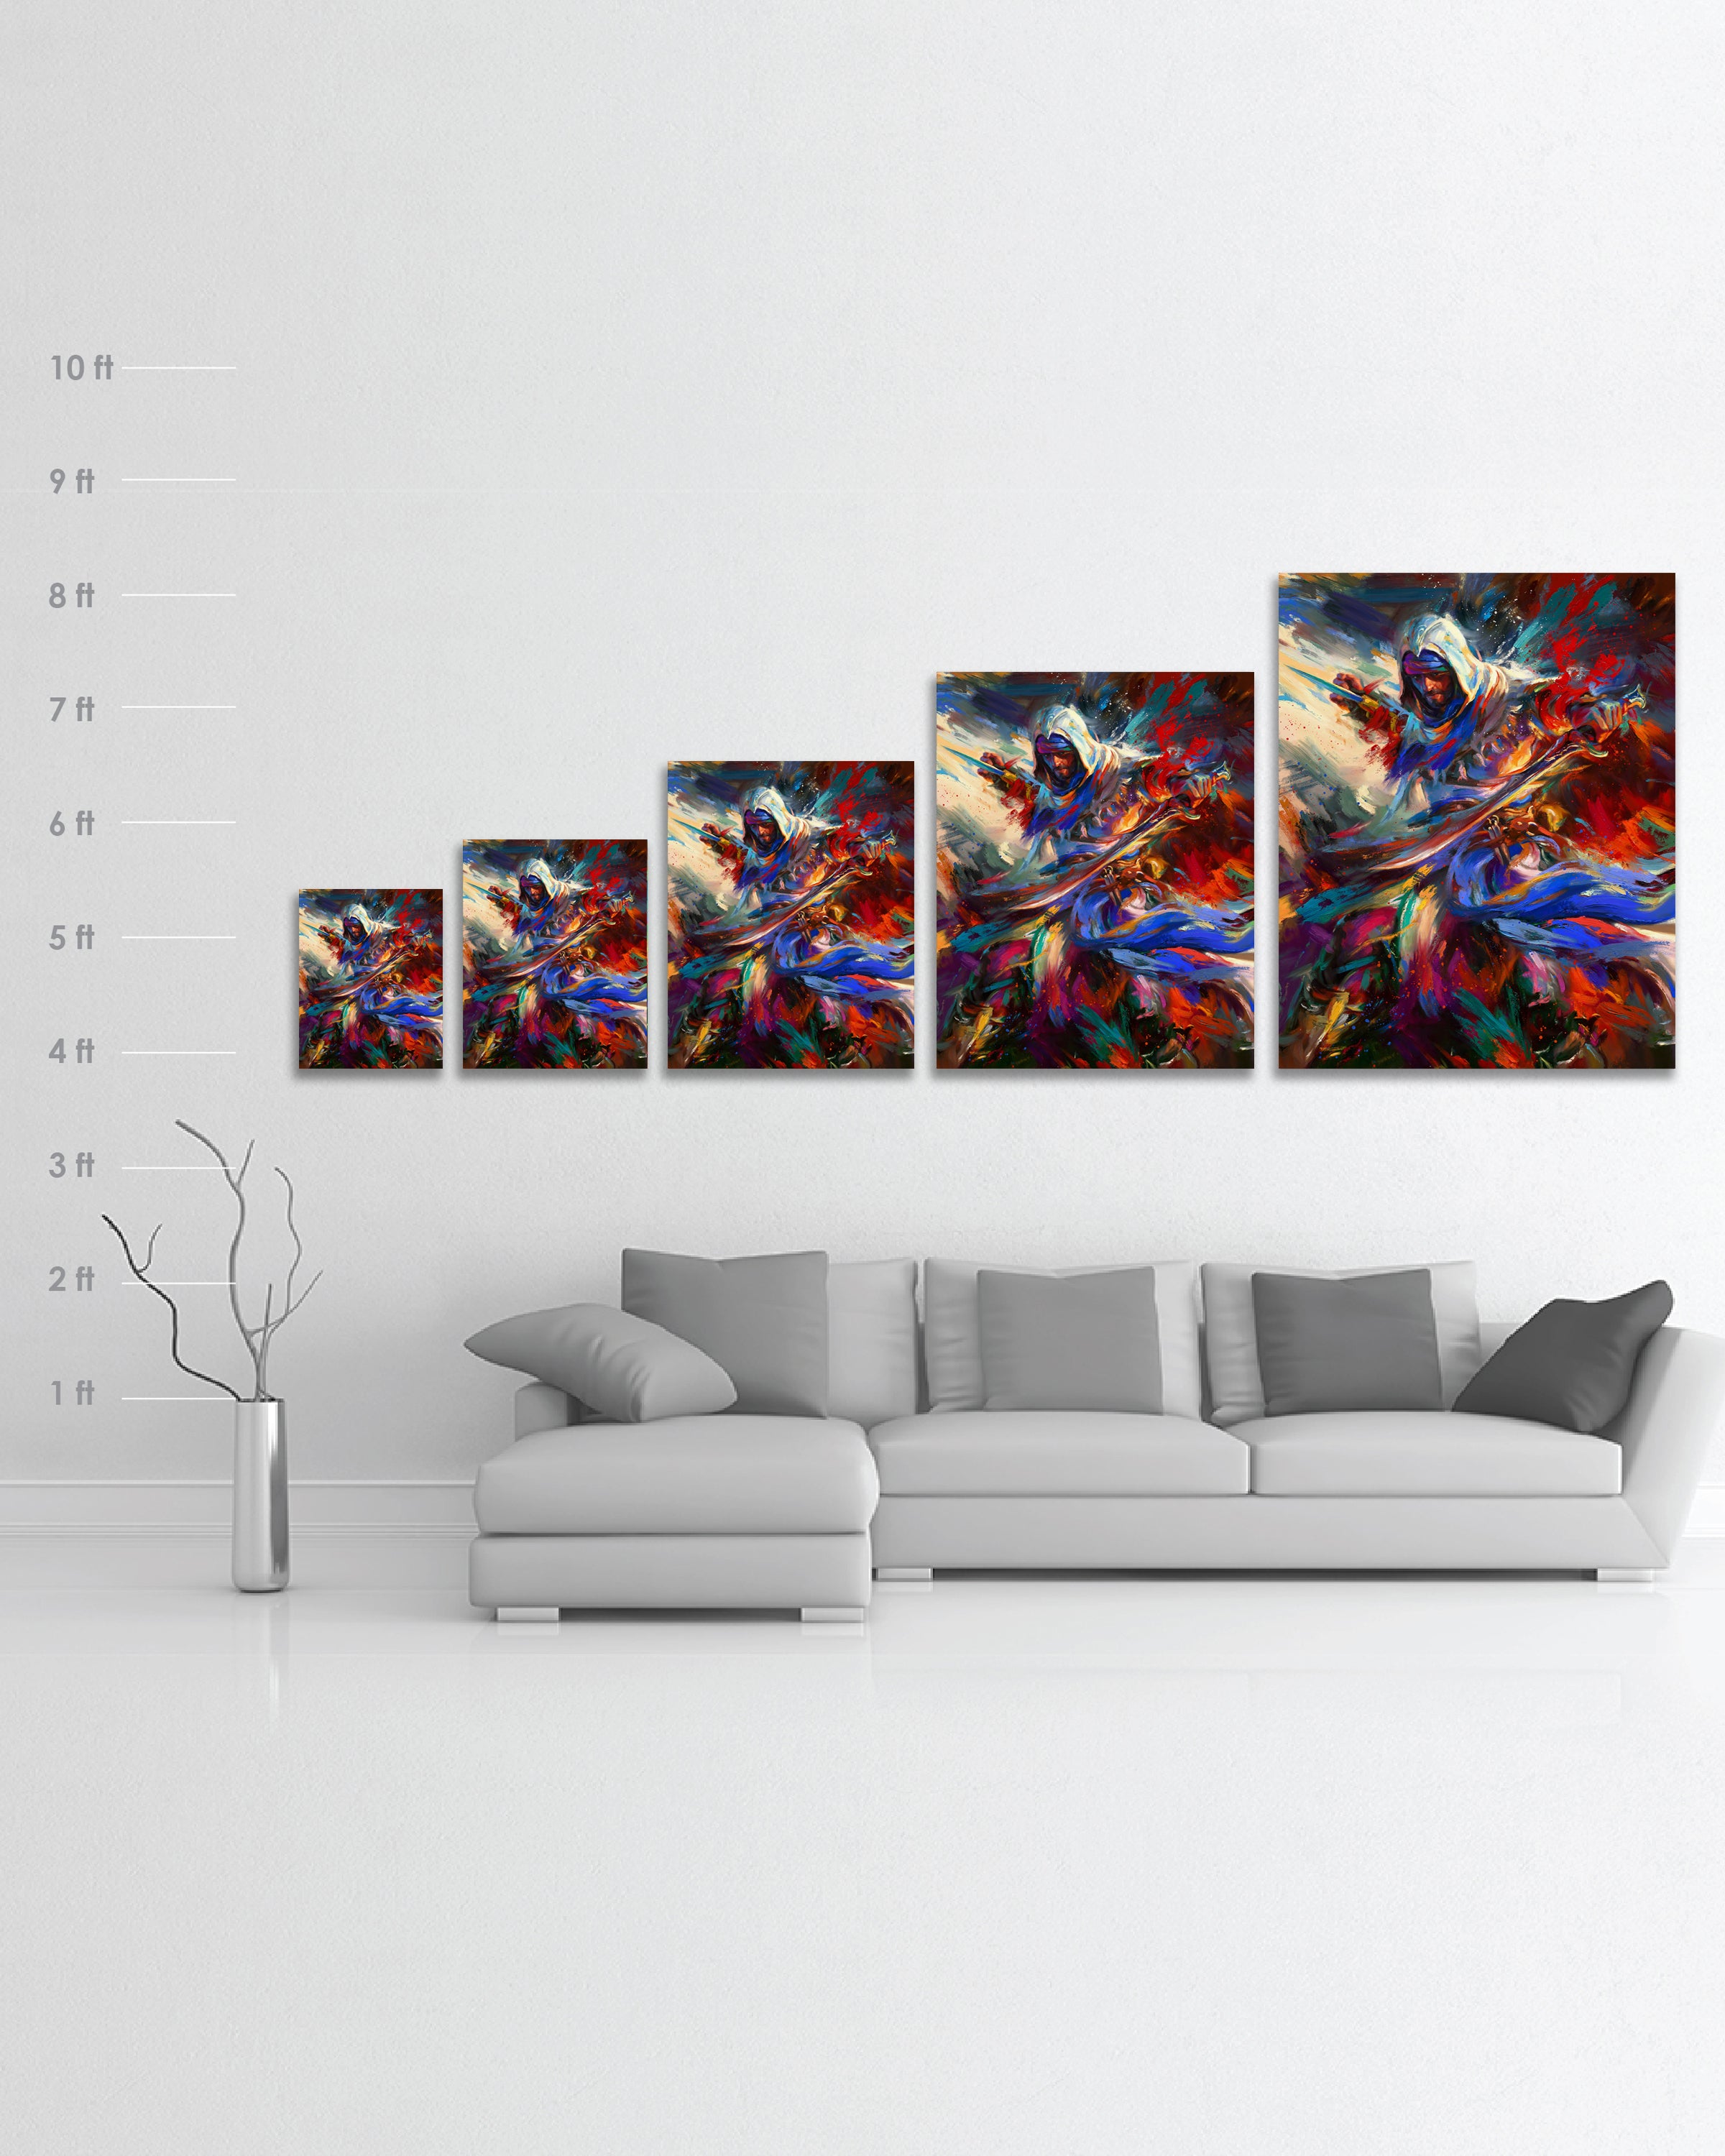 
                  
                    Limited edition artwork on canvas of Assassin's Creed Basim of Mirage bursting forth with energy and painted with colorful brushstrokes in an expressionistic style in a room setting with scale dimensions.
                  
                